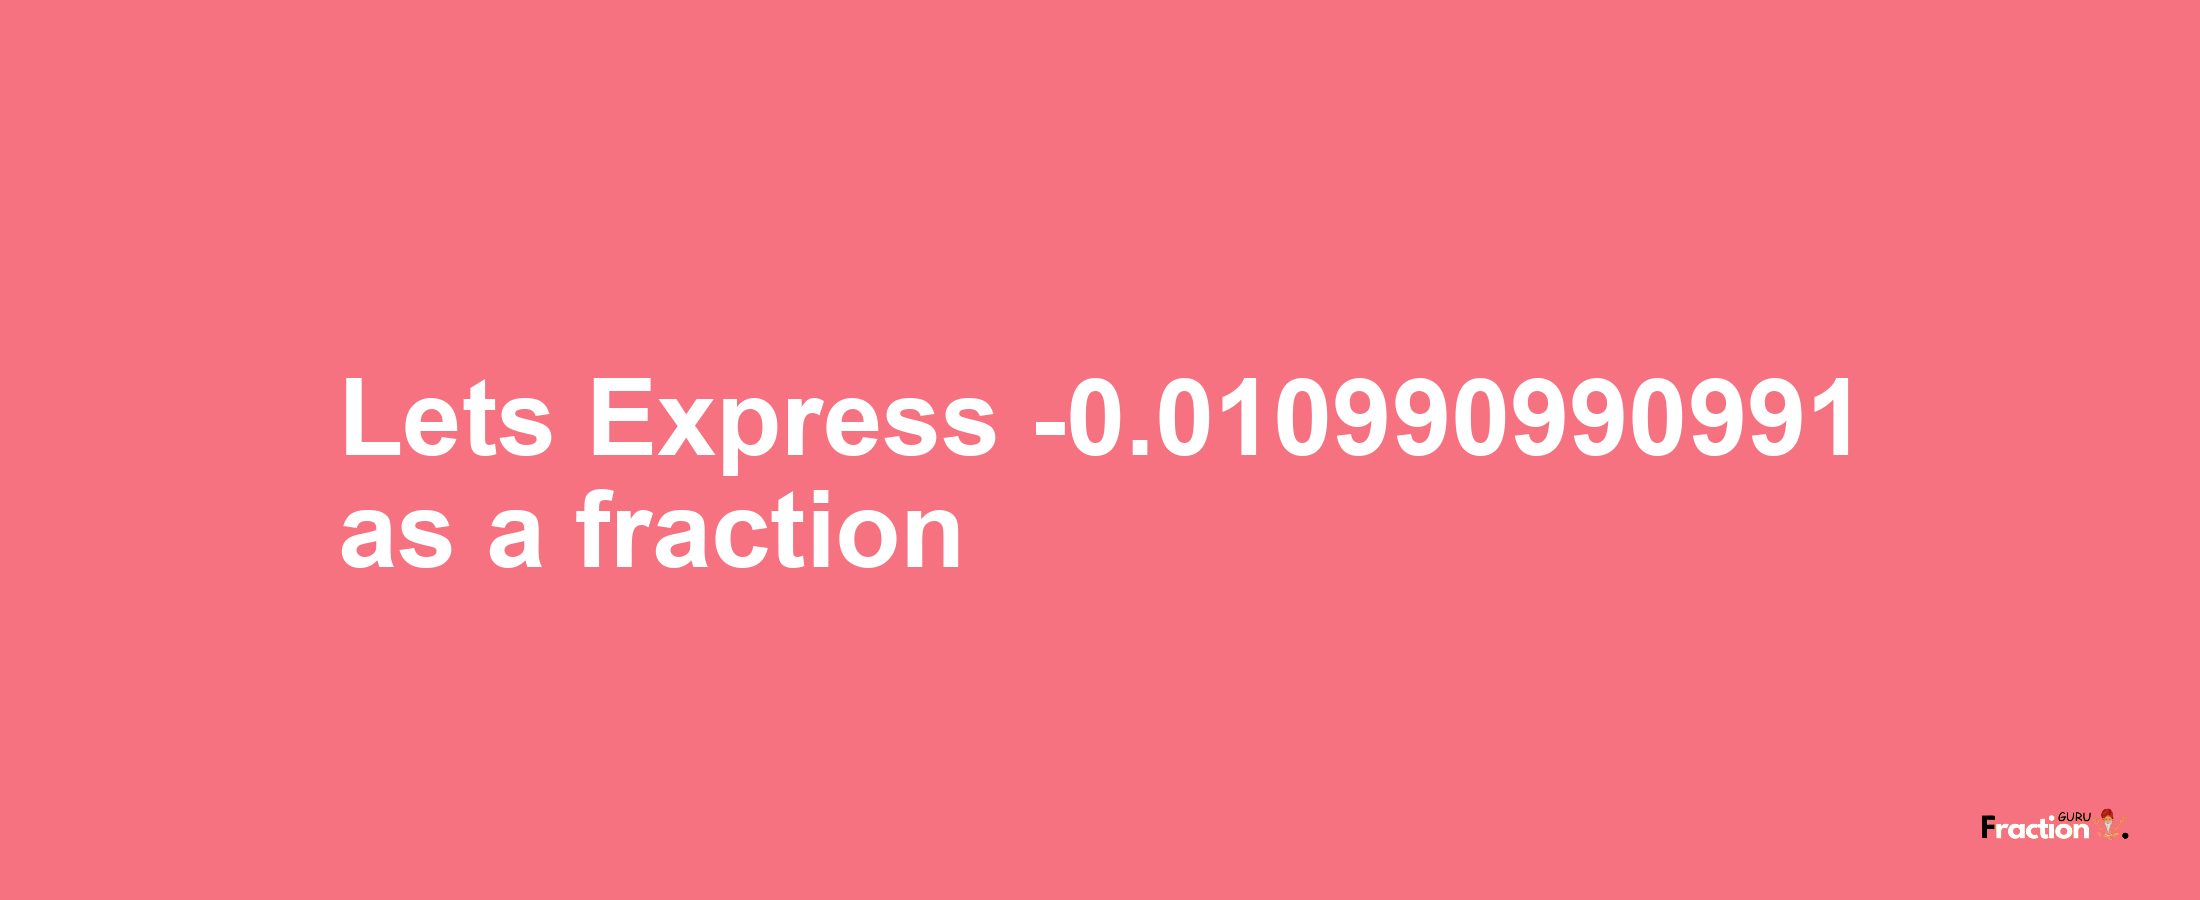 Lets Express -0.010990990991 as afraction